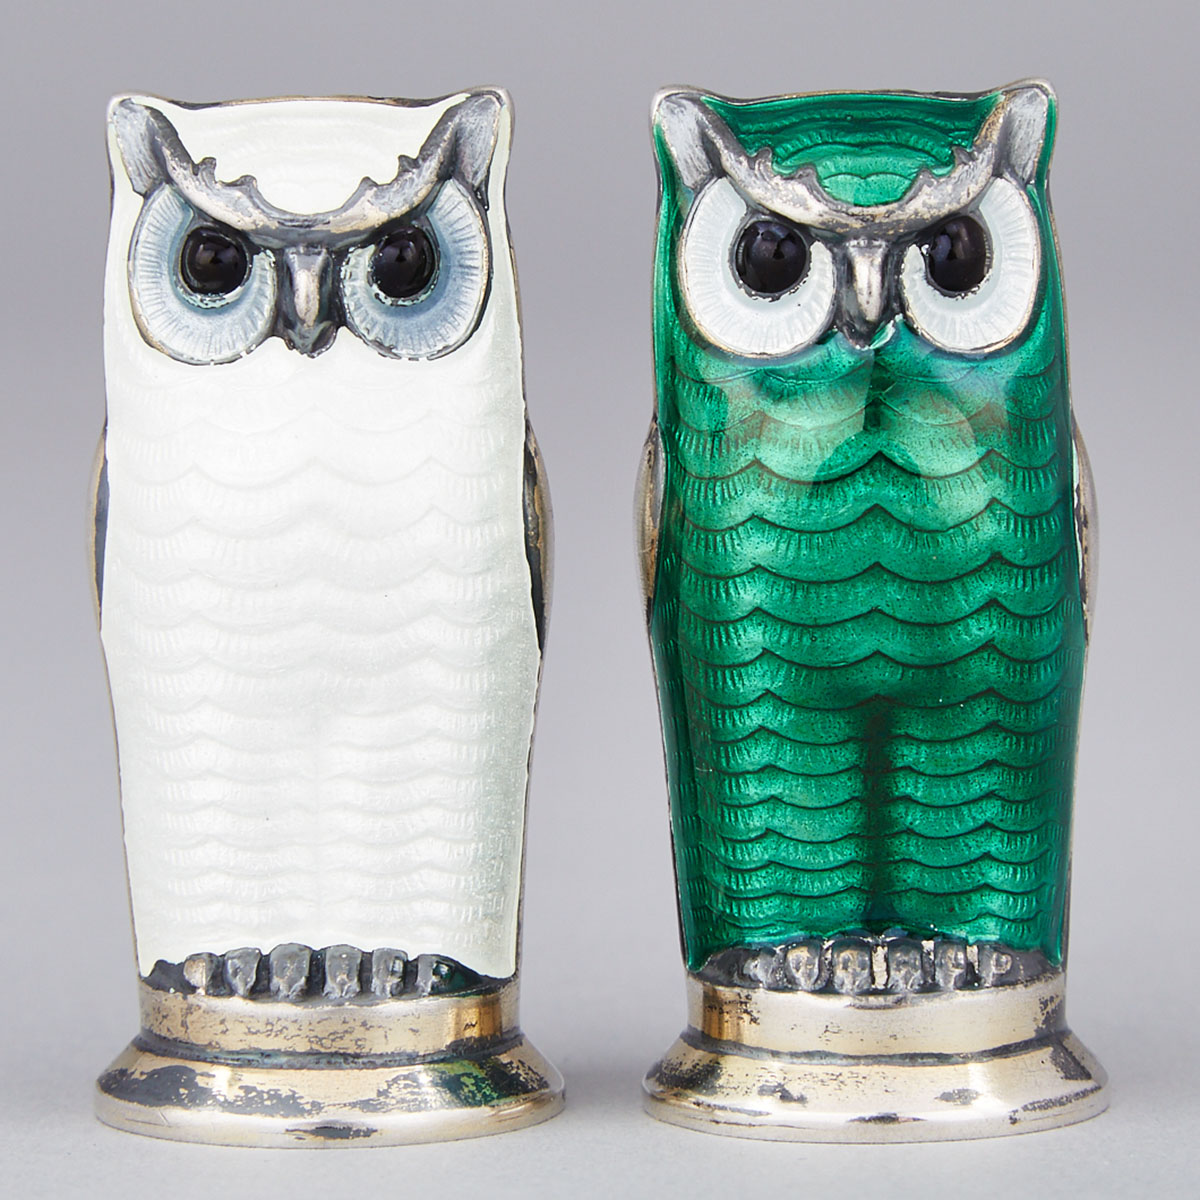 Pair of Norwegian Silver and Enamel Owl-Form Salt and Pepper Casters, David Andersen, Olso, 20th century